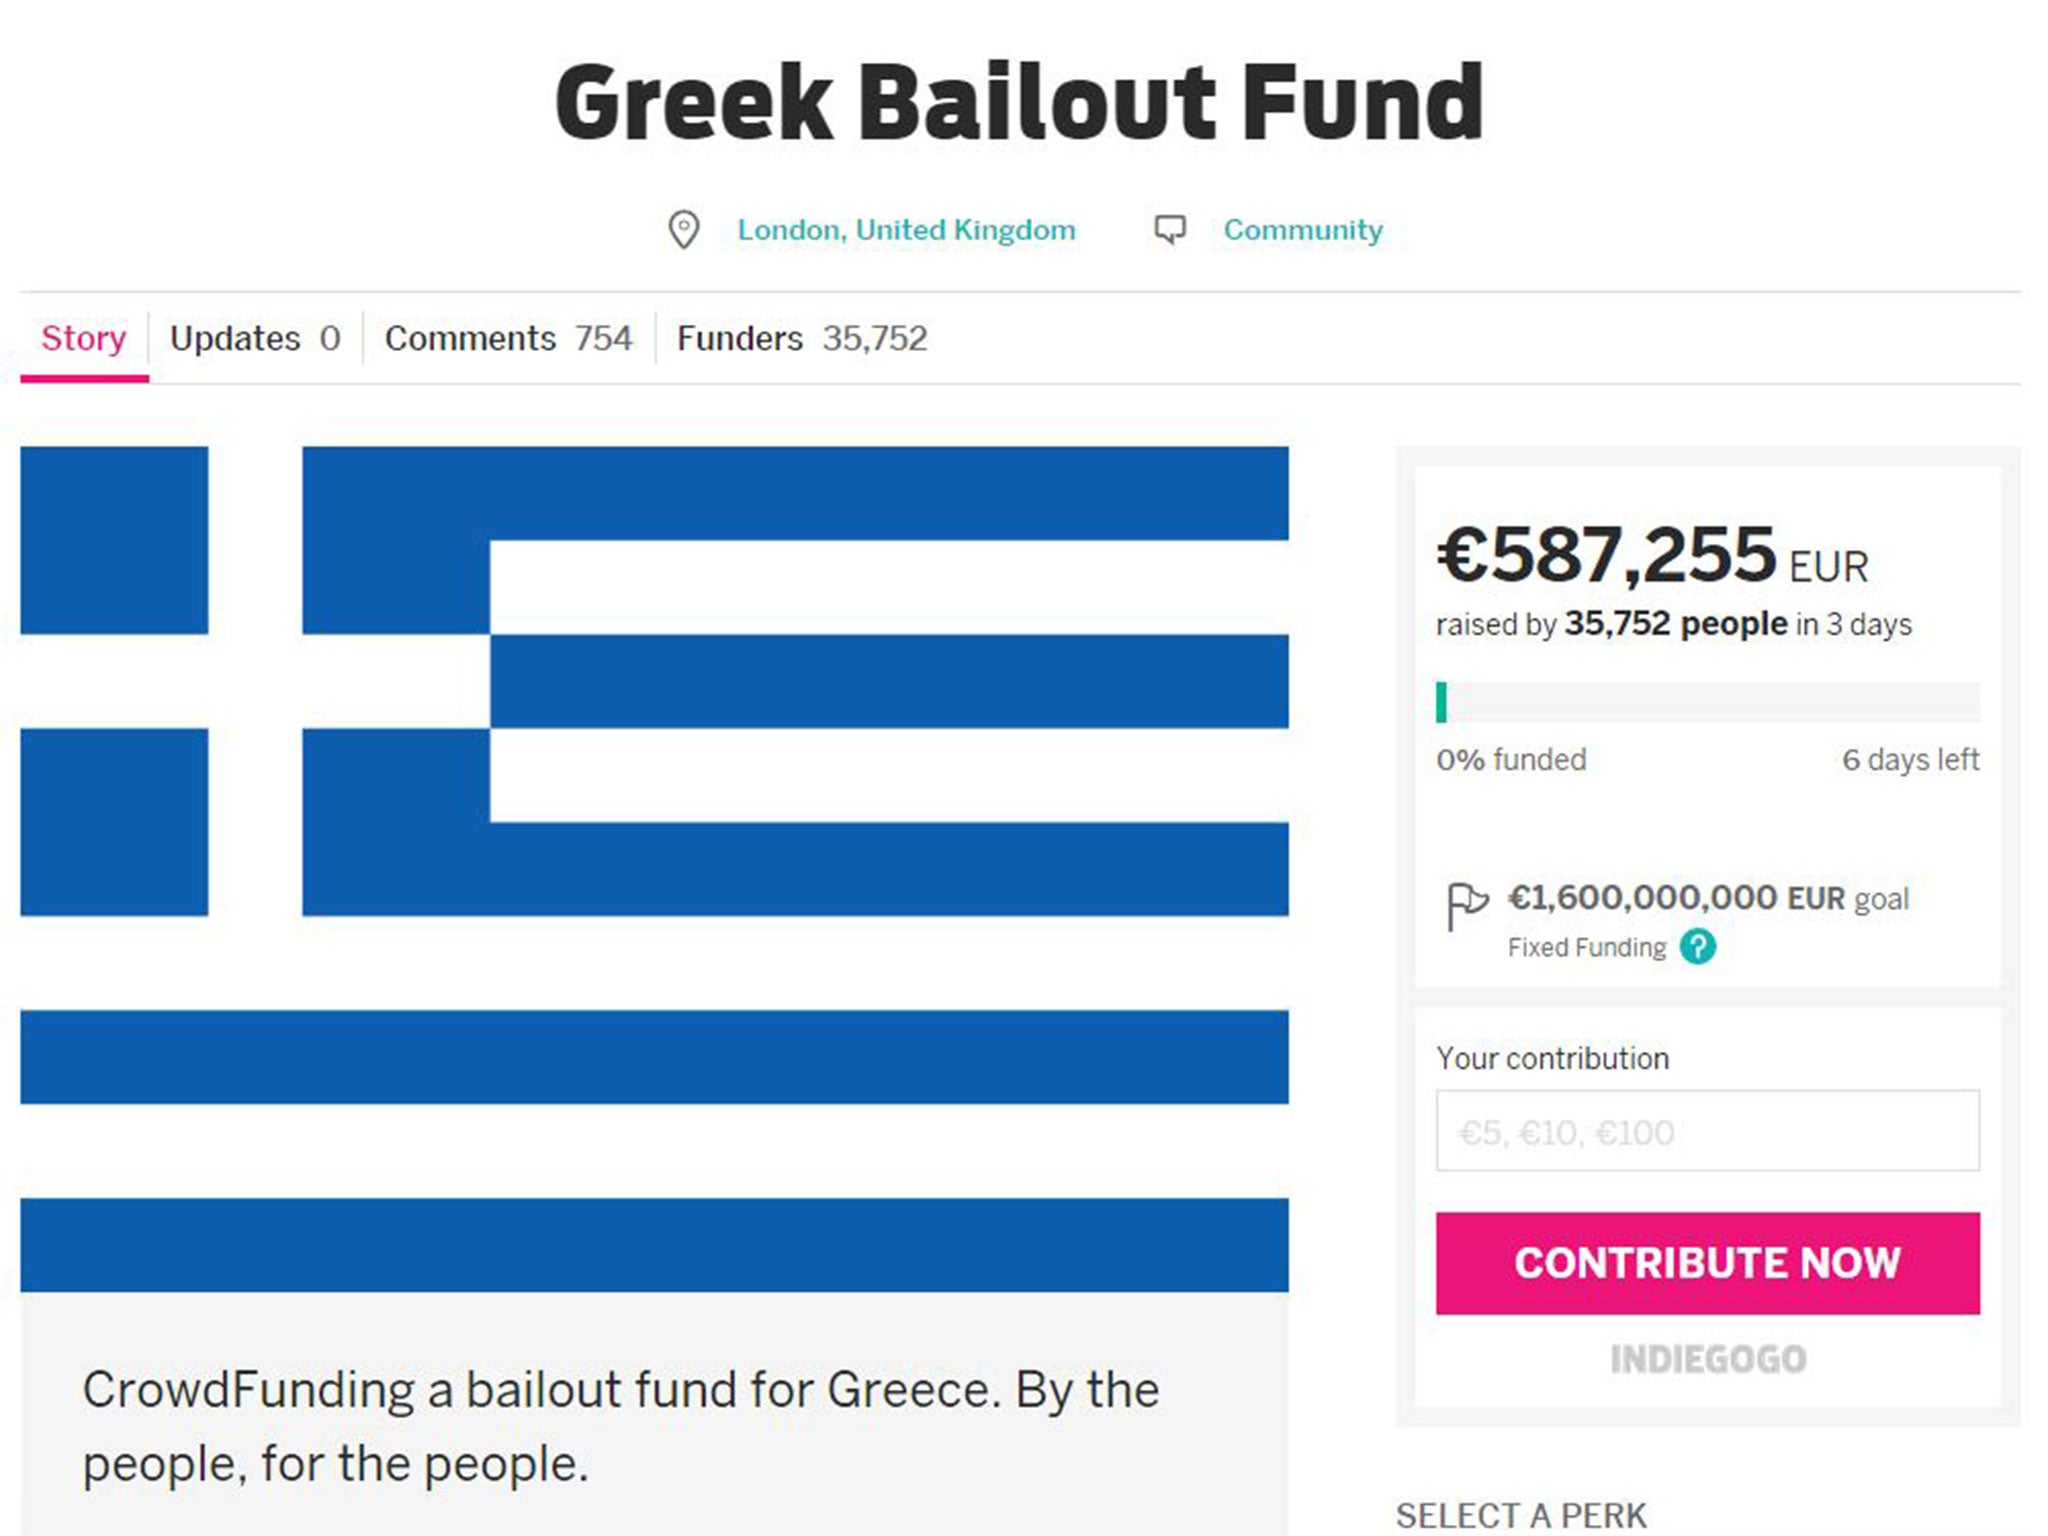 According to the numbers for the original campaign, 7500 people donated enough to be rewarded with a Greek feta and olive salad and 11,300 donated the €10 needed to be rewarded with a bottle of Ouzo